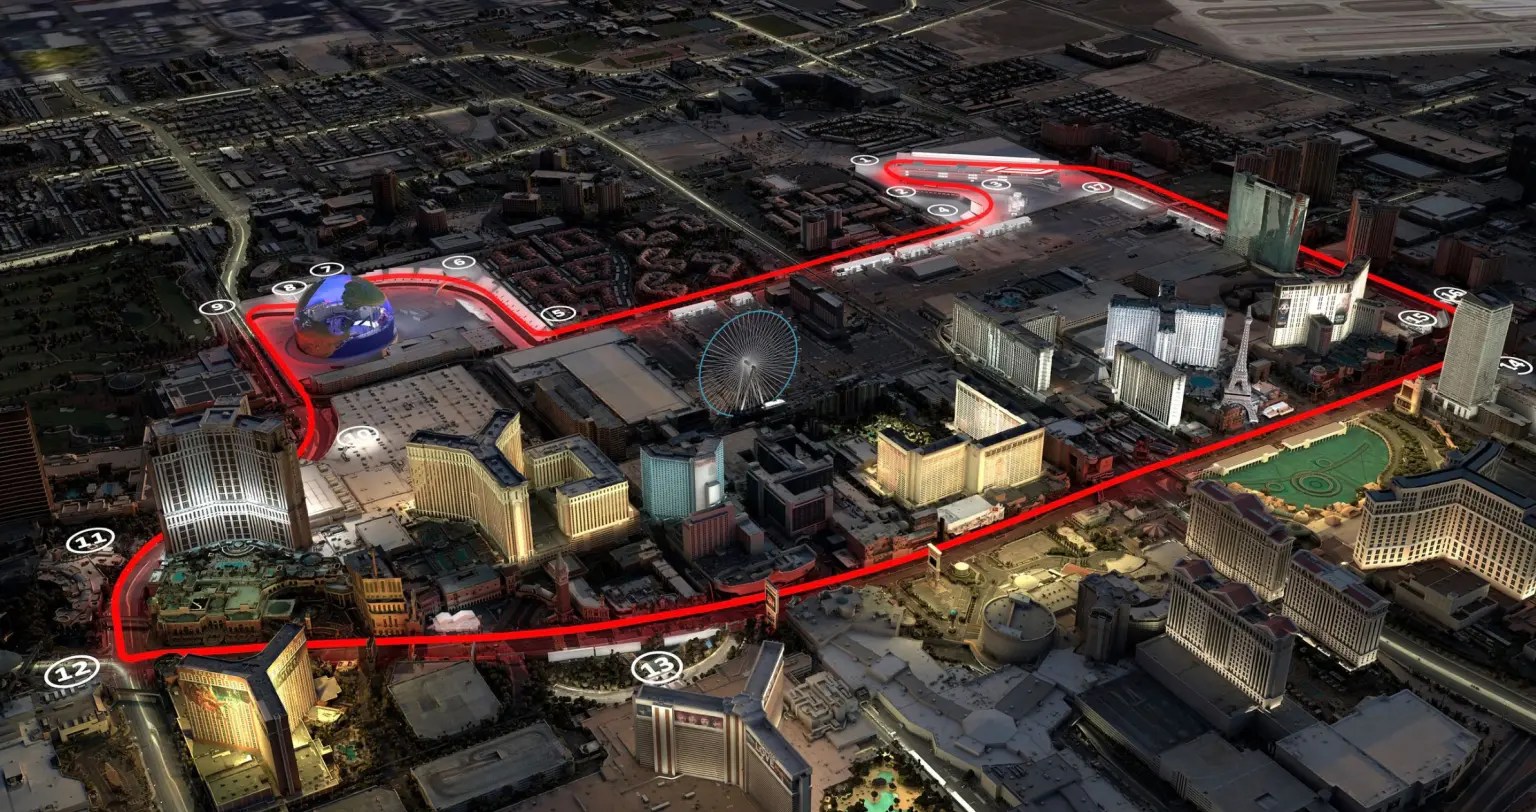 F1 Demands Las Vegas Venues Pay for a View of the Race Report